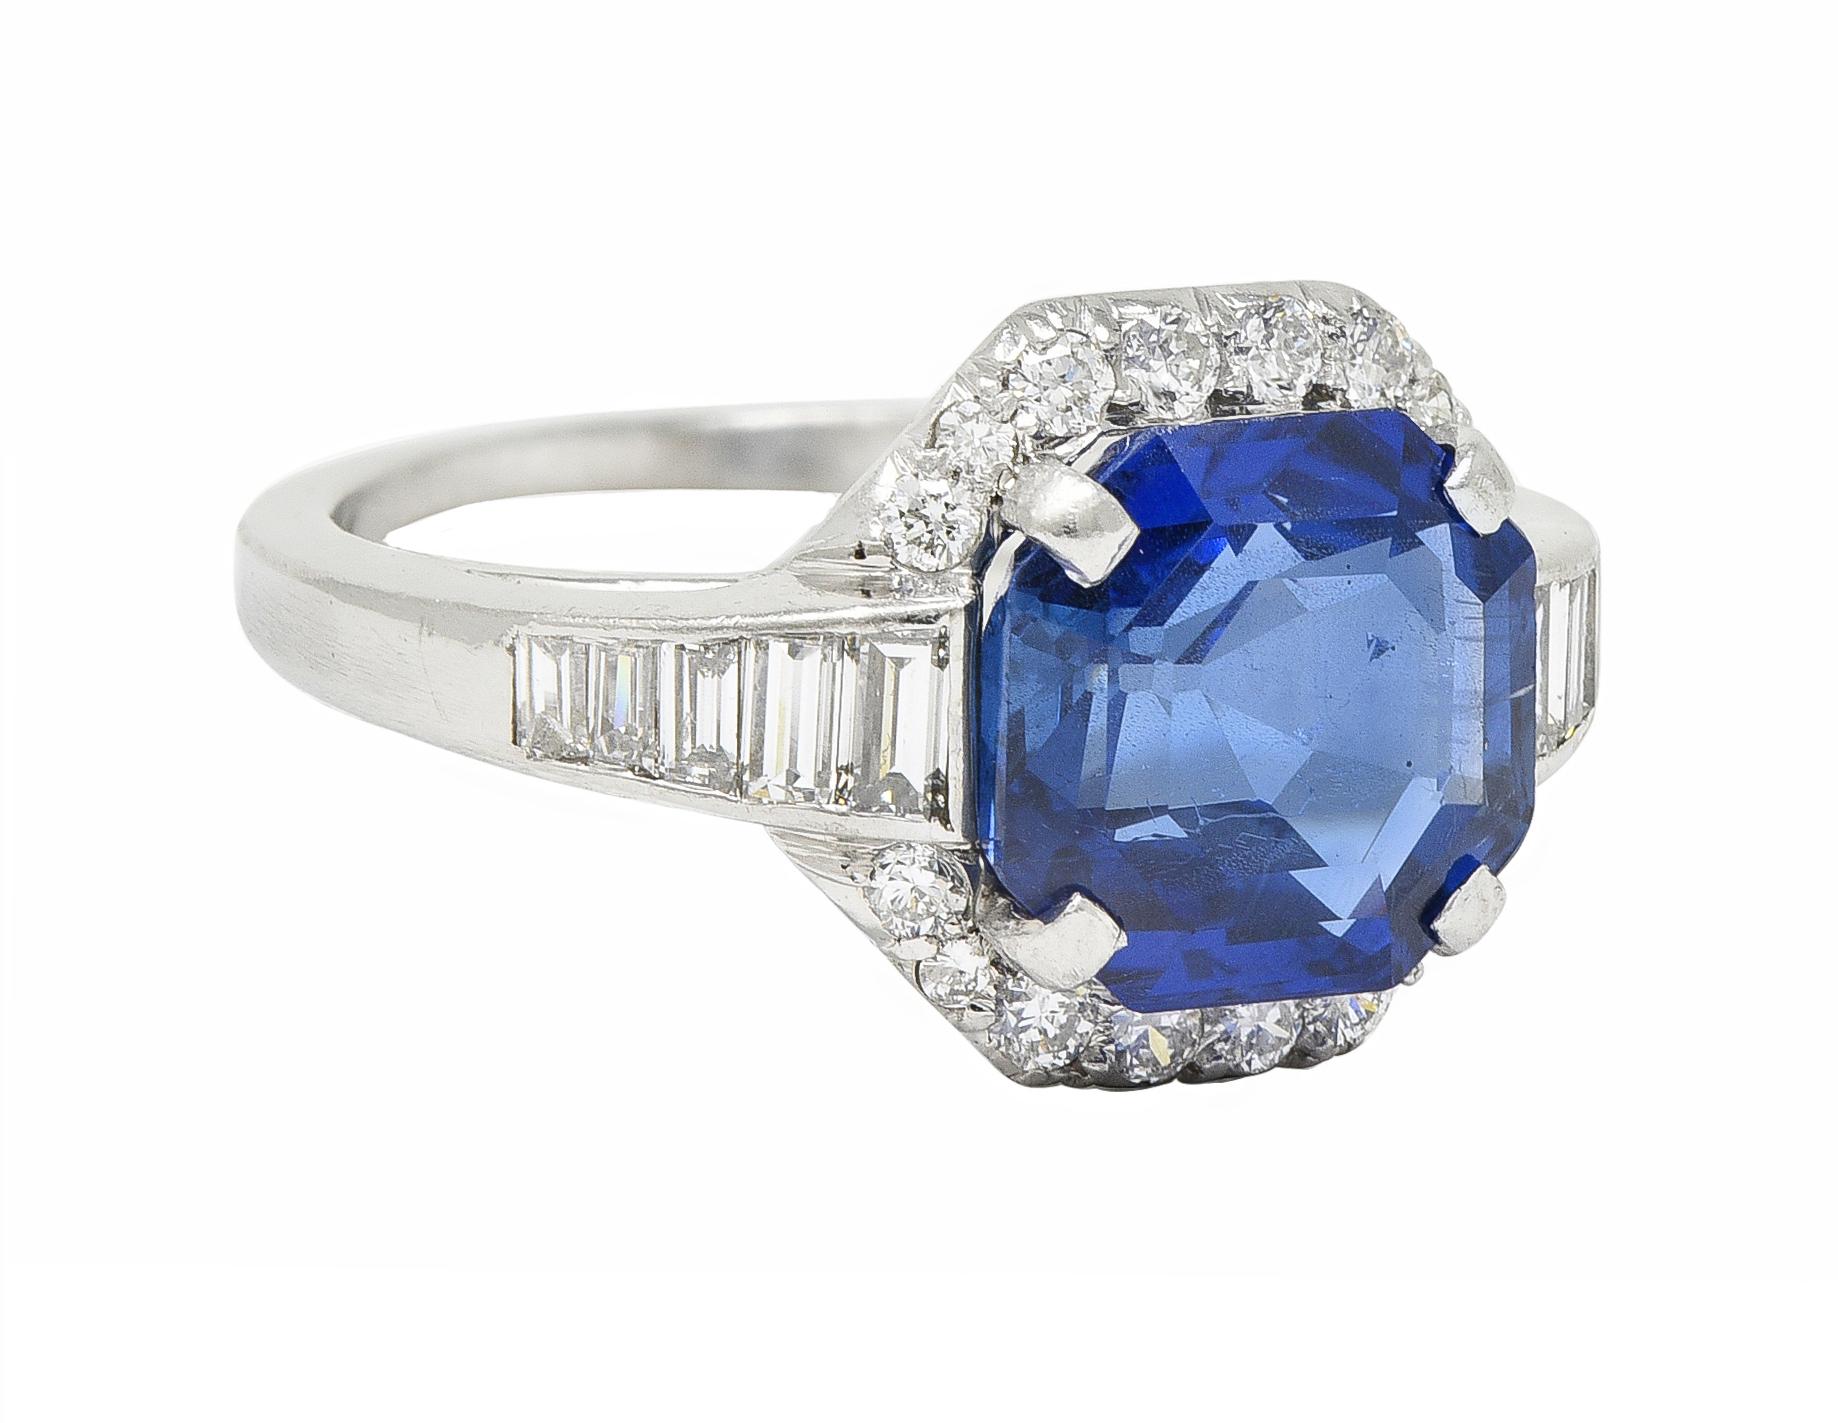 Centering an octagonal step cut sapphire weighing 3.49 carats - transparent medium blue
Natural Burmese in origin with no indications of heat treatment - prong set
With a halo surround of round brilliant cut diamonds 
Bisected by baguette cut